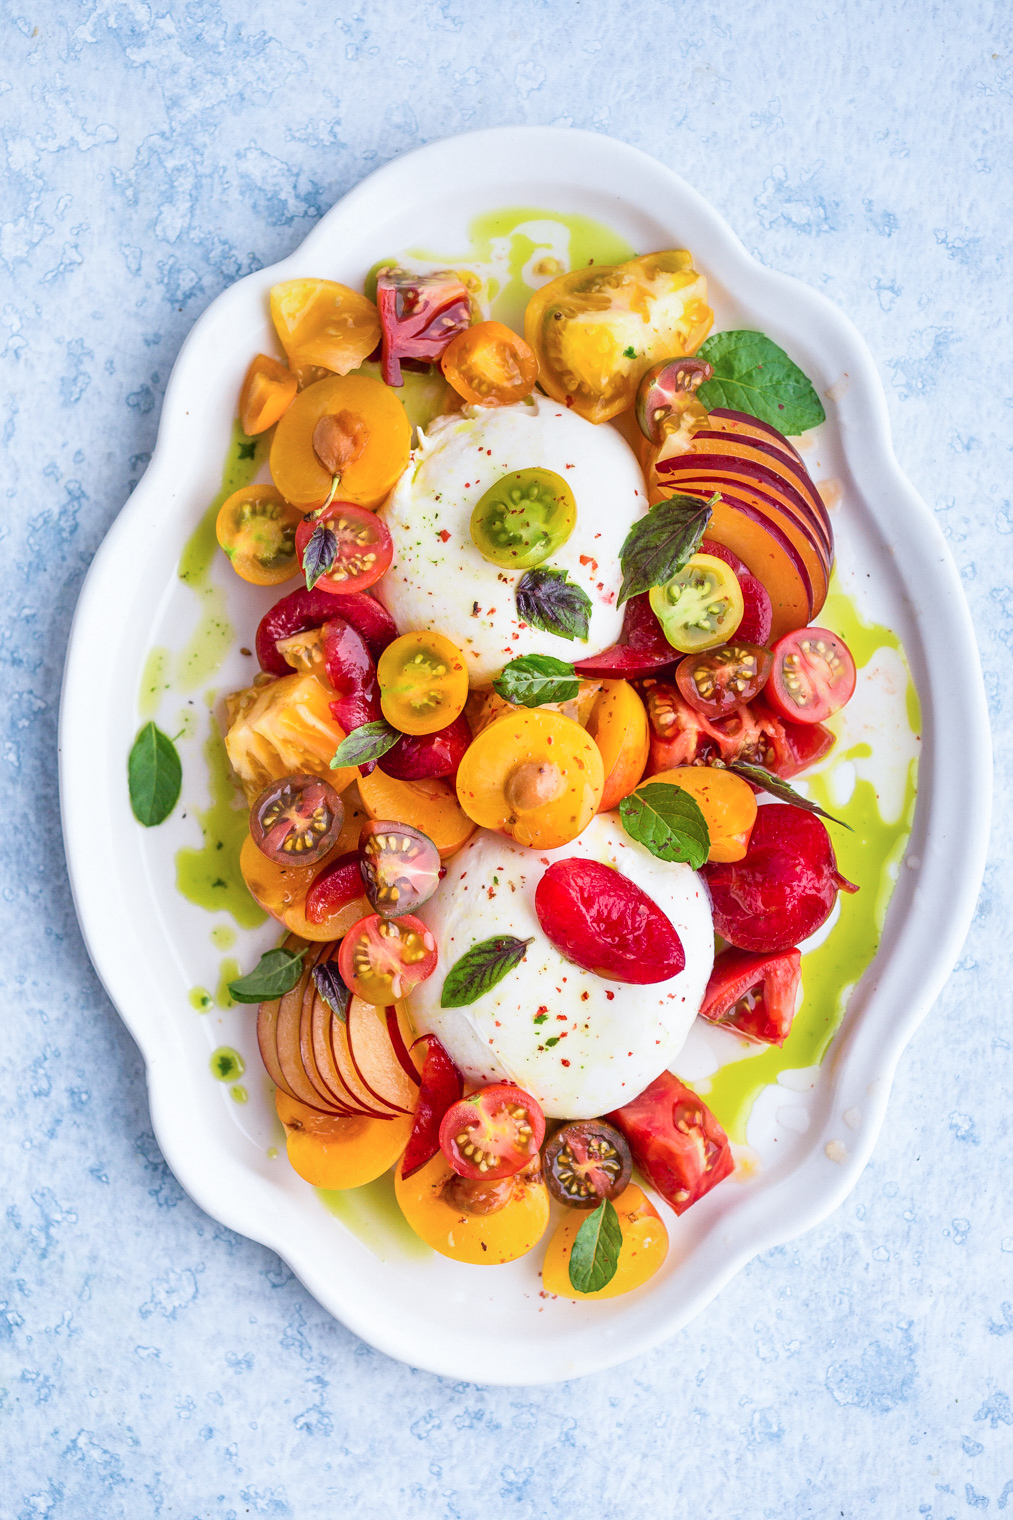 Burrata caprese with Plums Tomatoes and Mint-Basil Oil on white serving platter